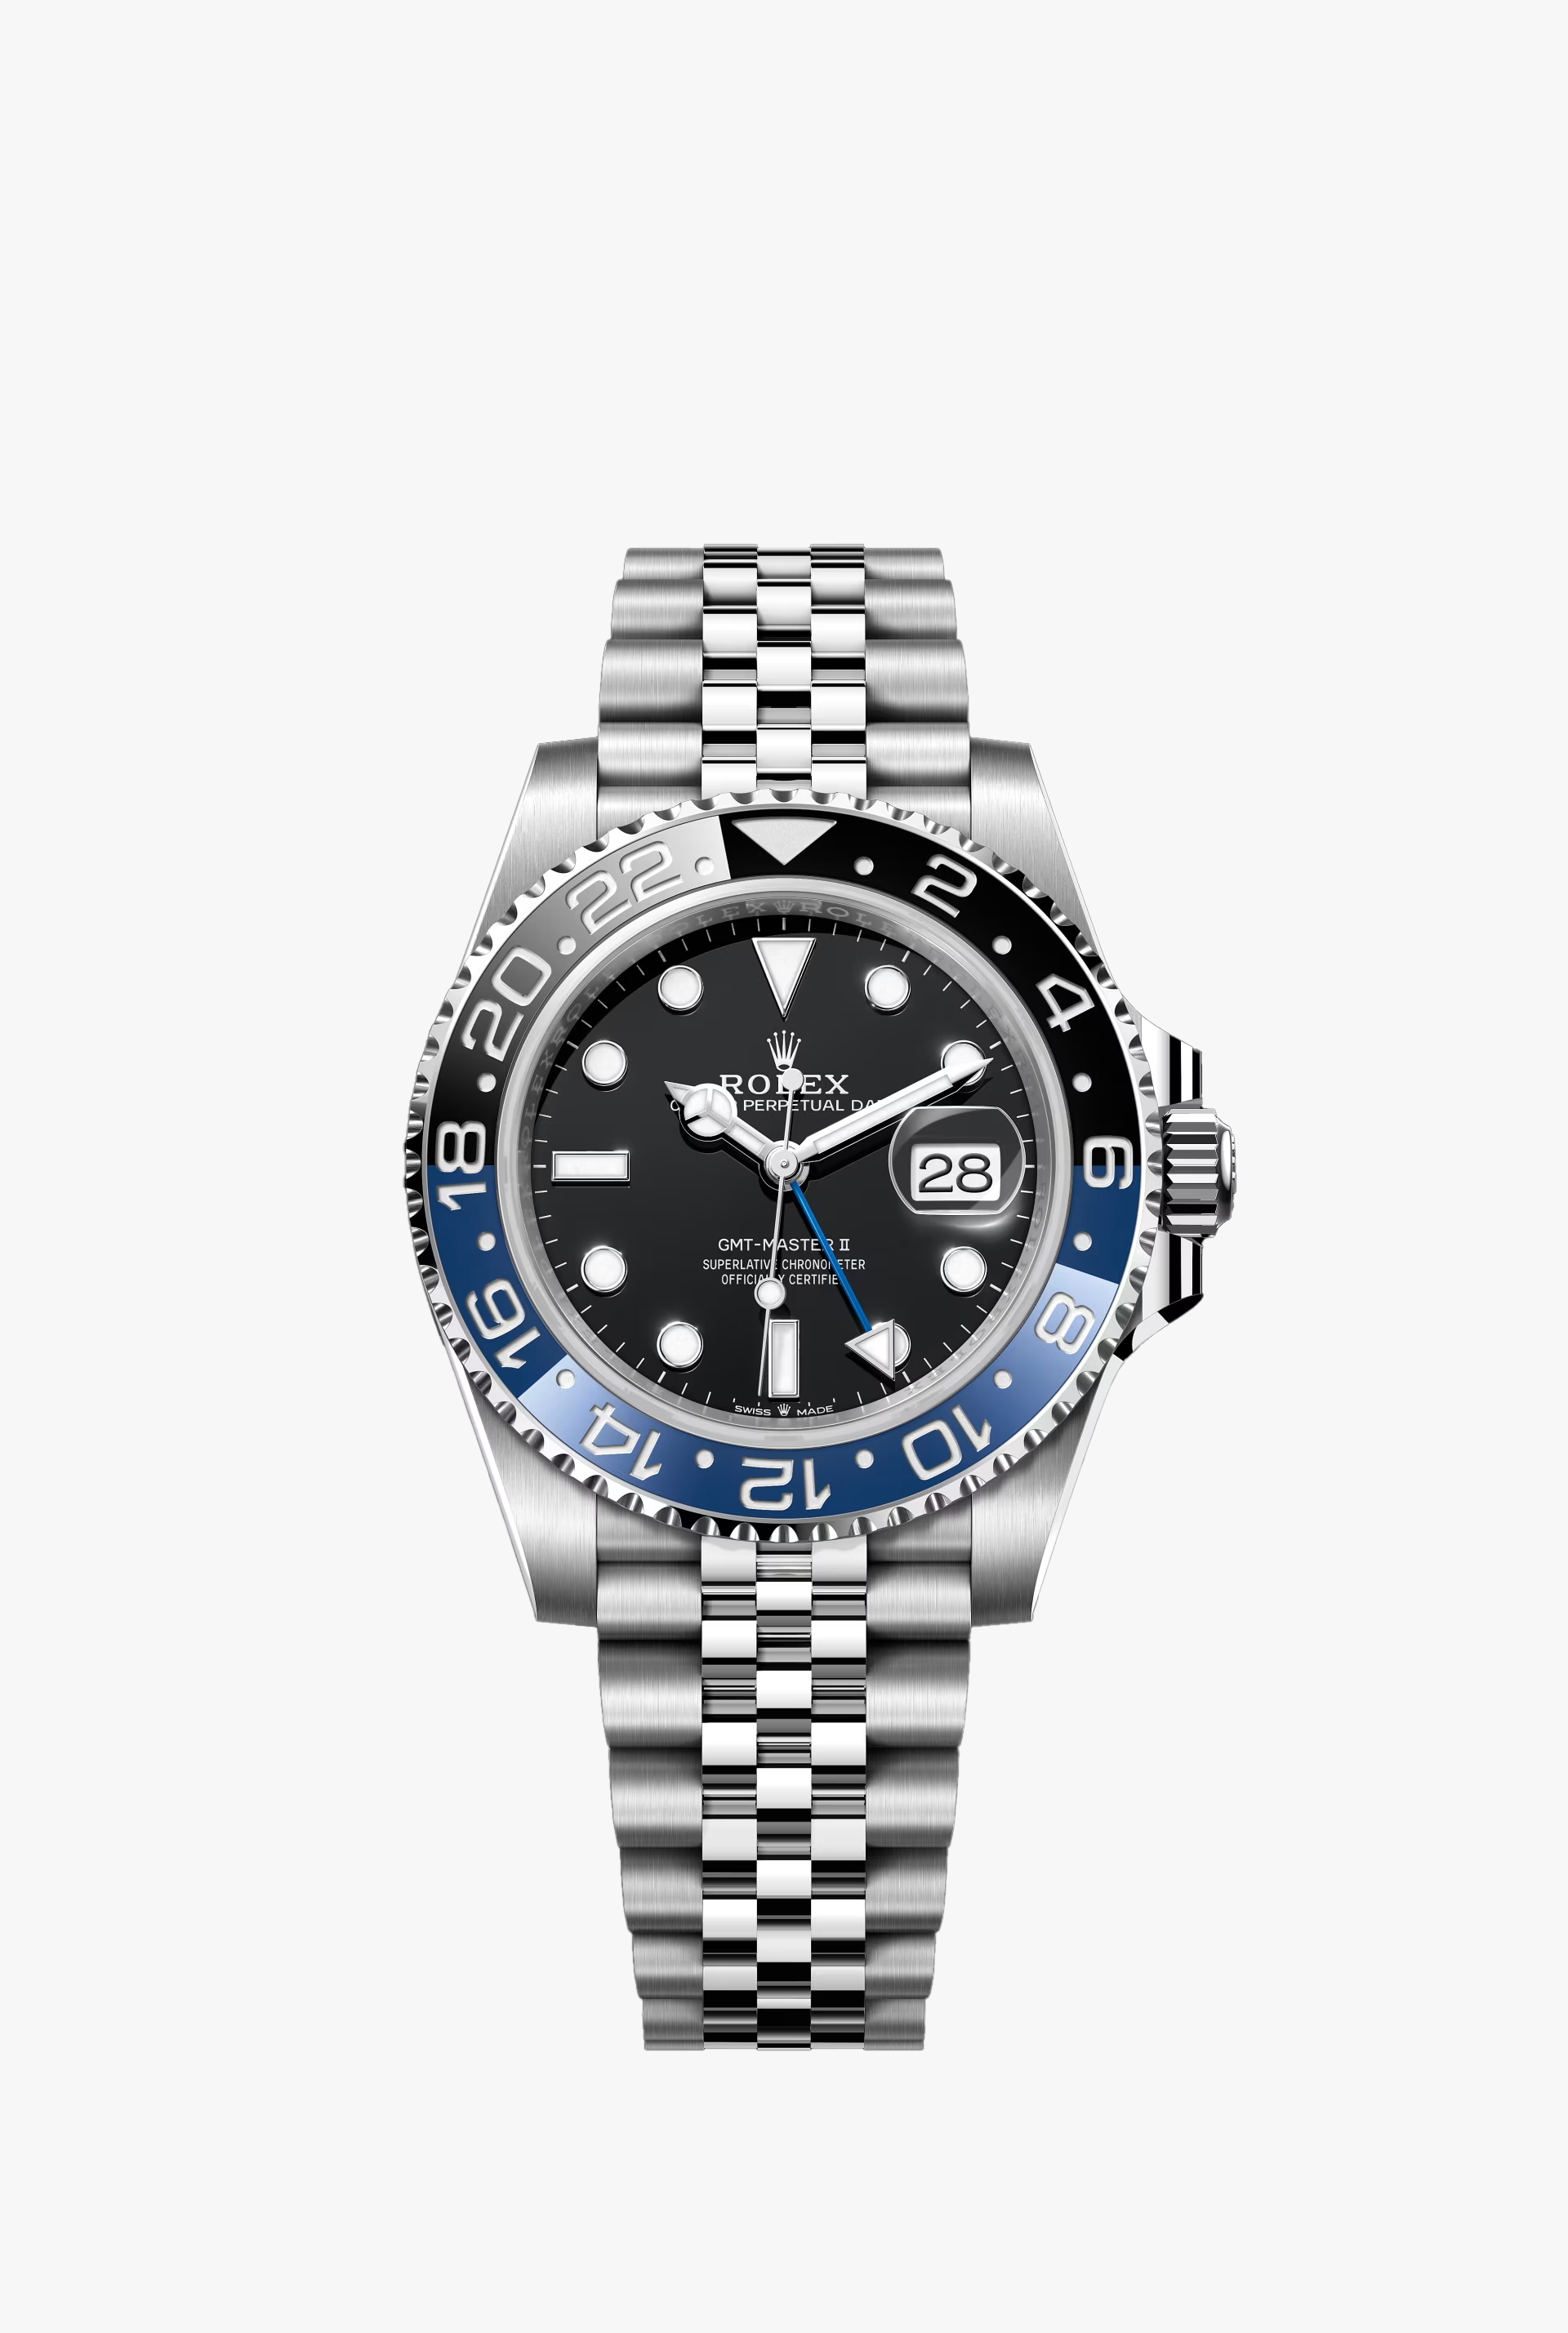 Rolex GMT-Masterl Oyster,40 mm,Oystersteel Reference 126710BLNR